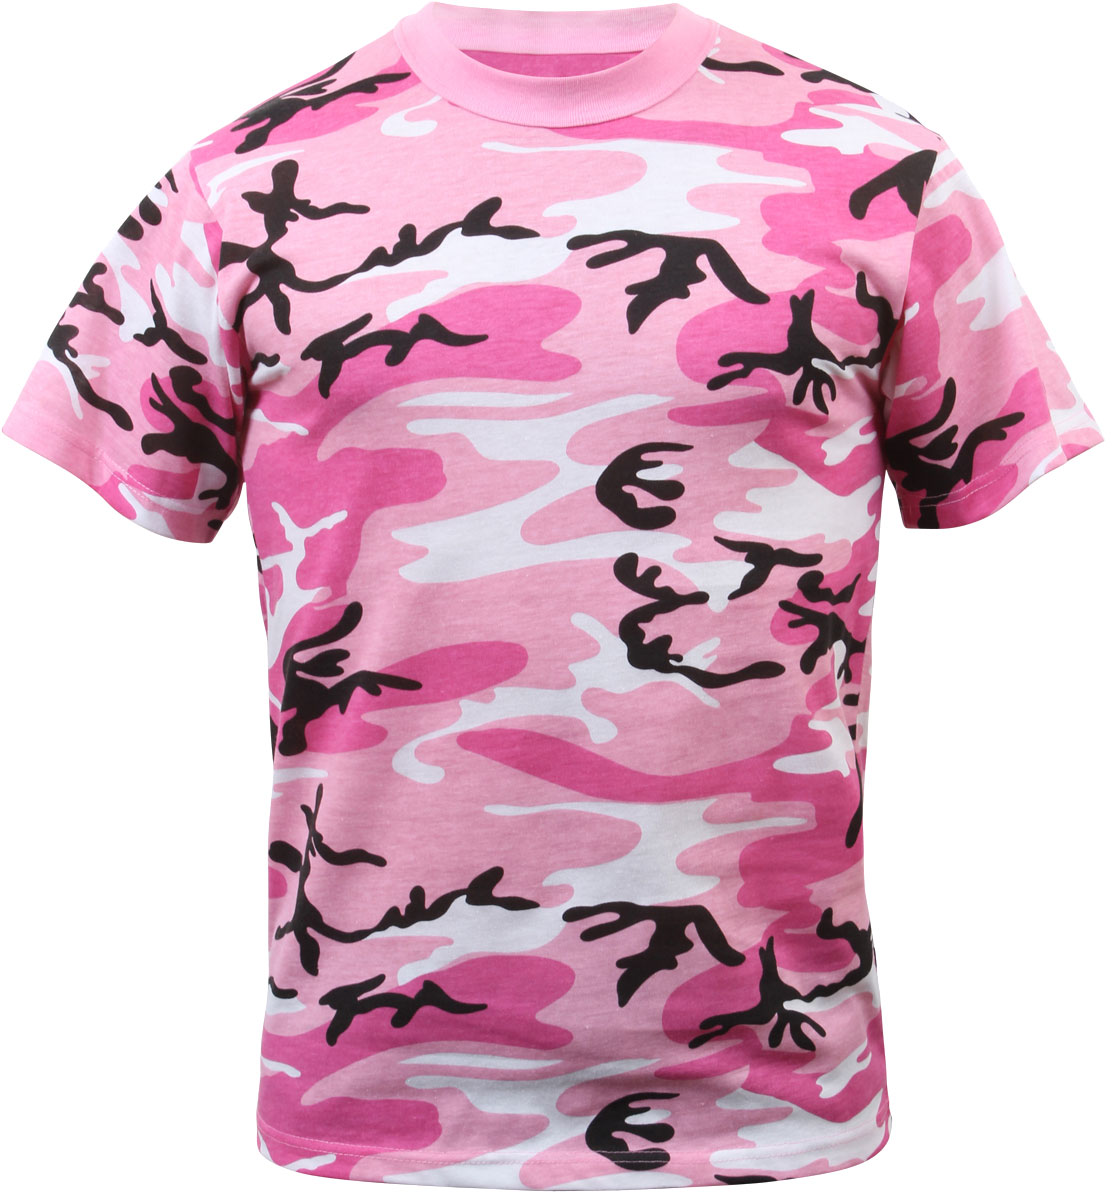 Rothco Pink Camouflage Poly/Cotton Short Sleeve Military T-Shirt